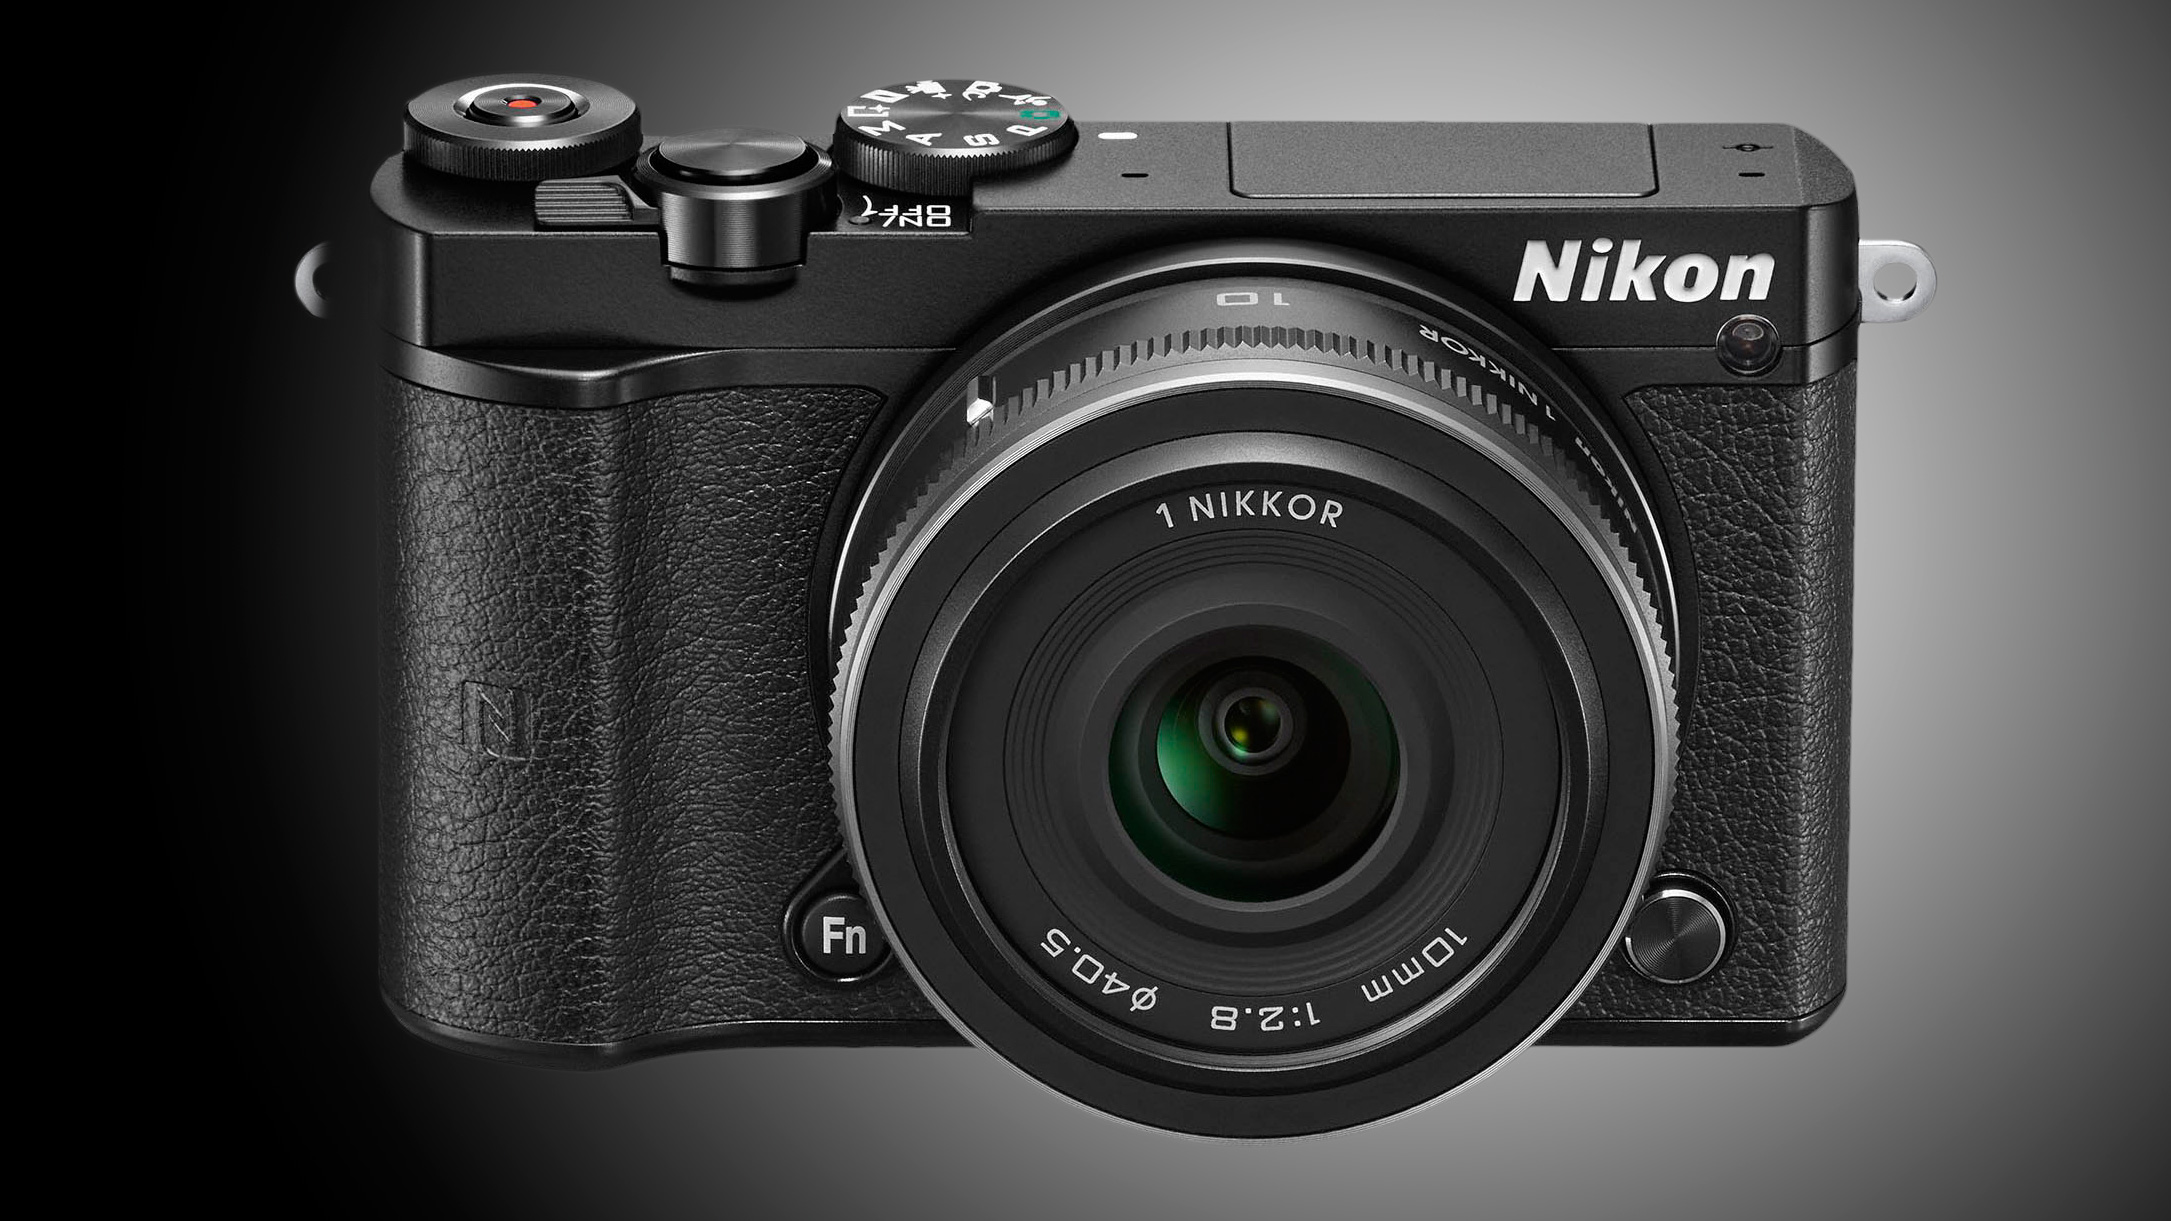 Monografie voedsel moord The new Nikon 1 J5 blends high-tech features with old-school looks |  TechRadar